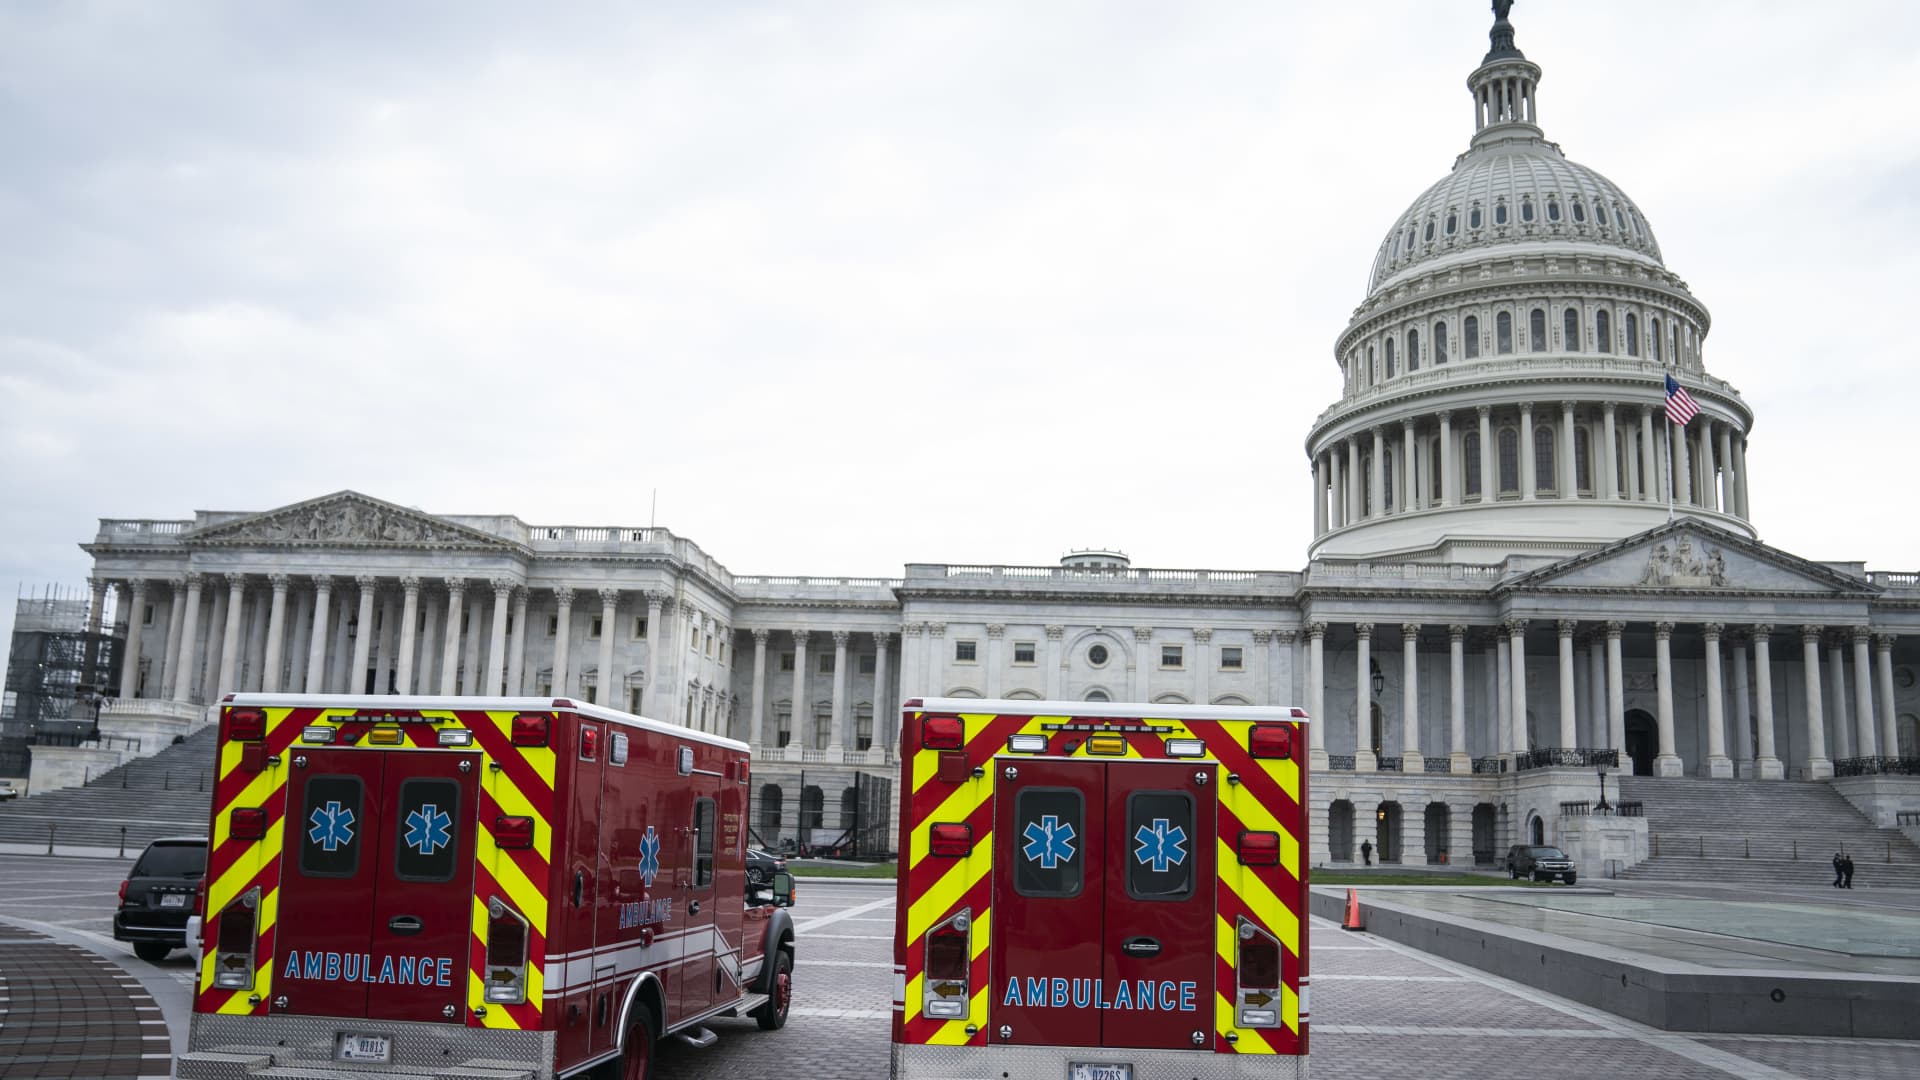 Ambulances sit parked outside of U.S. Capitol in Washington, D.C., U.S., on Tuesday, April 21, 2020. The Senate has scheduled a late afternoon session Tuesday in anticipation of approving an agreement on a nearly $500 billion stimulus bill, including $310 billion to replenish the small business program.